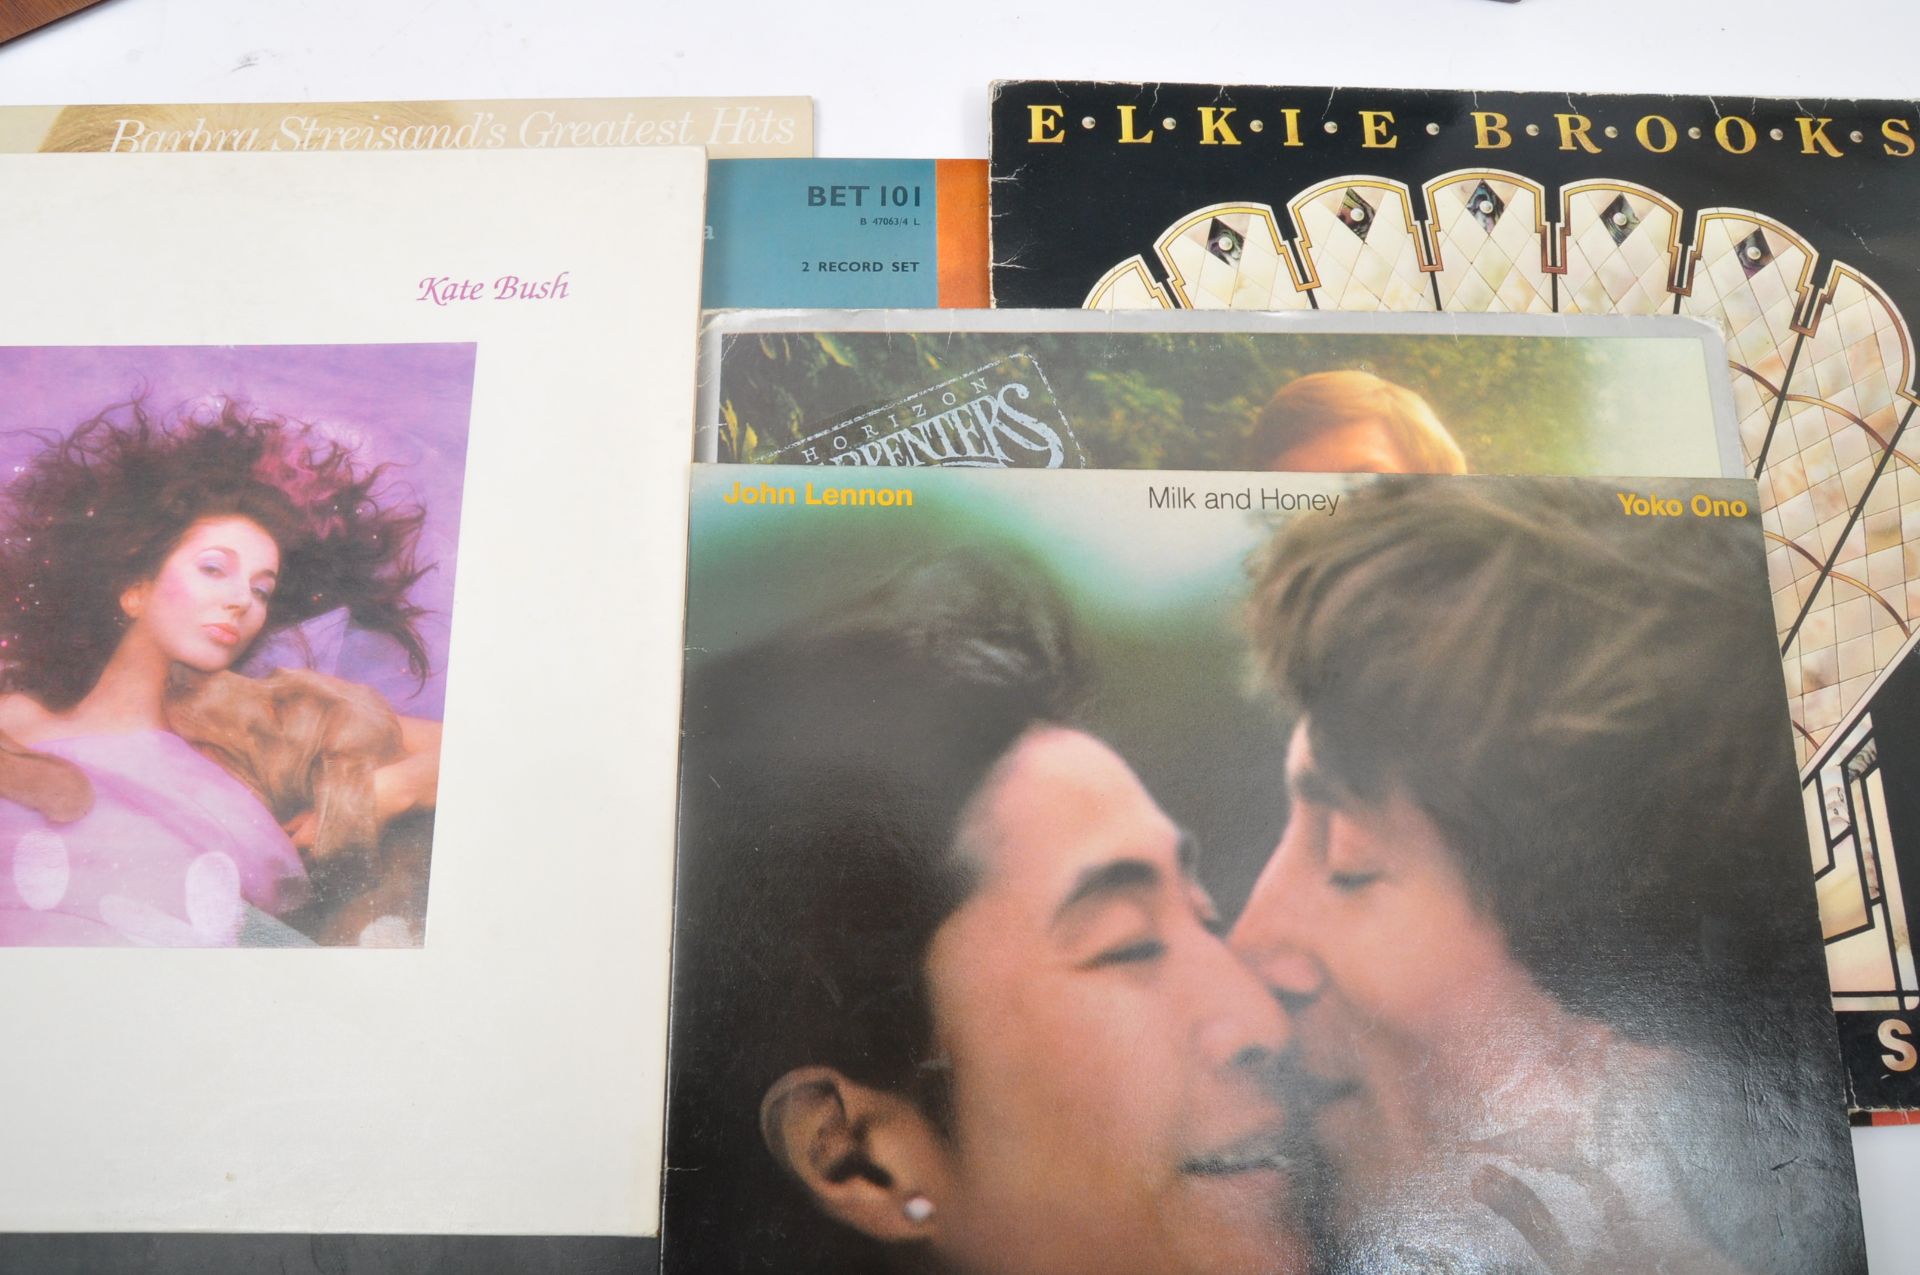 LARGE COLLECTION VINTAGE LP LONG PLAY VINYL RECORDS - Image 5 of 5